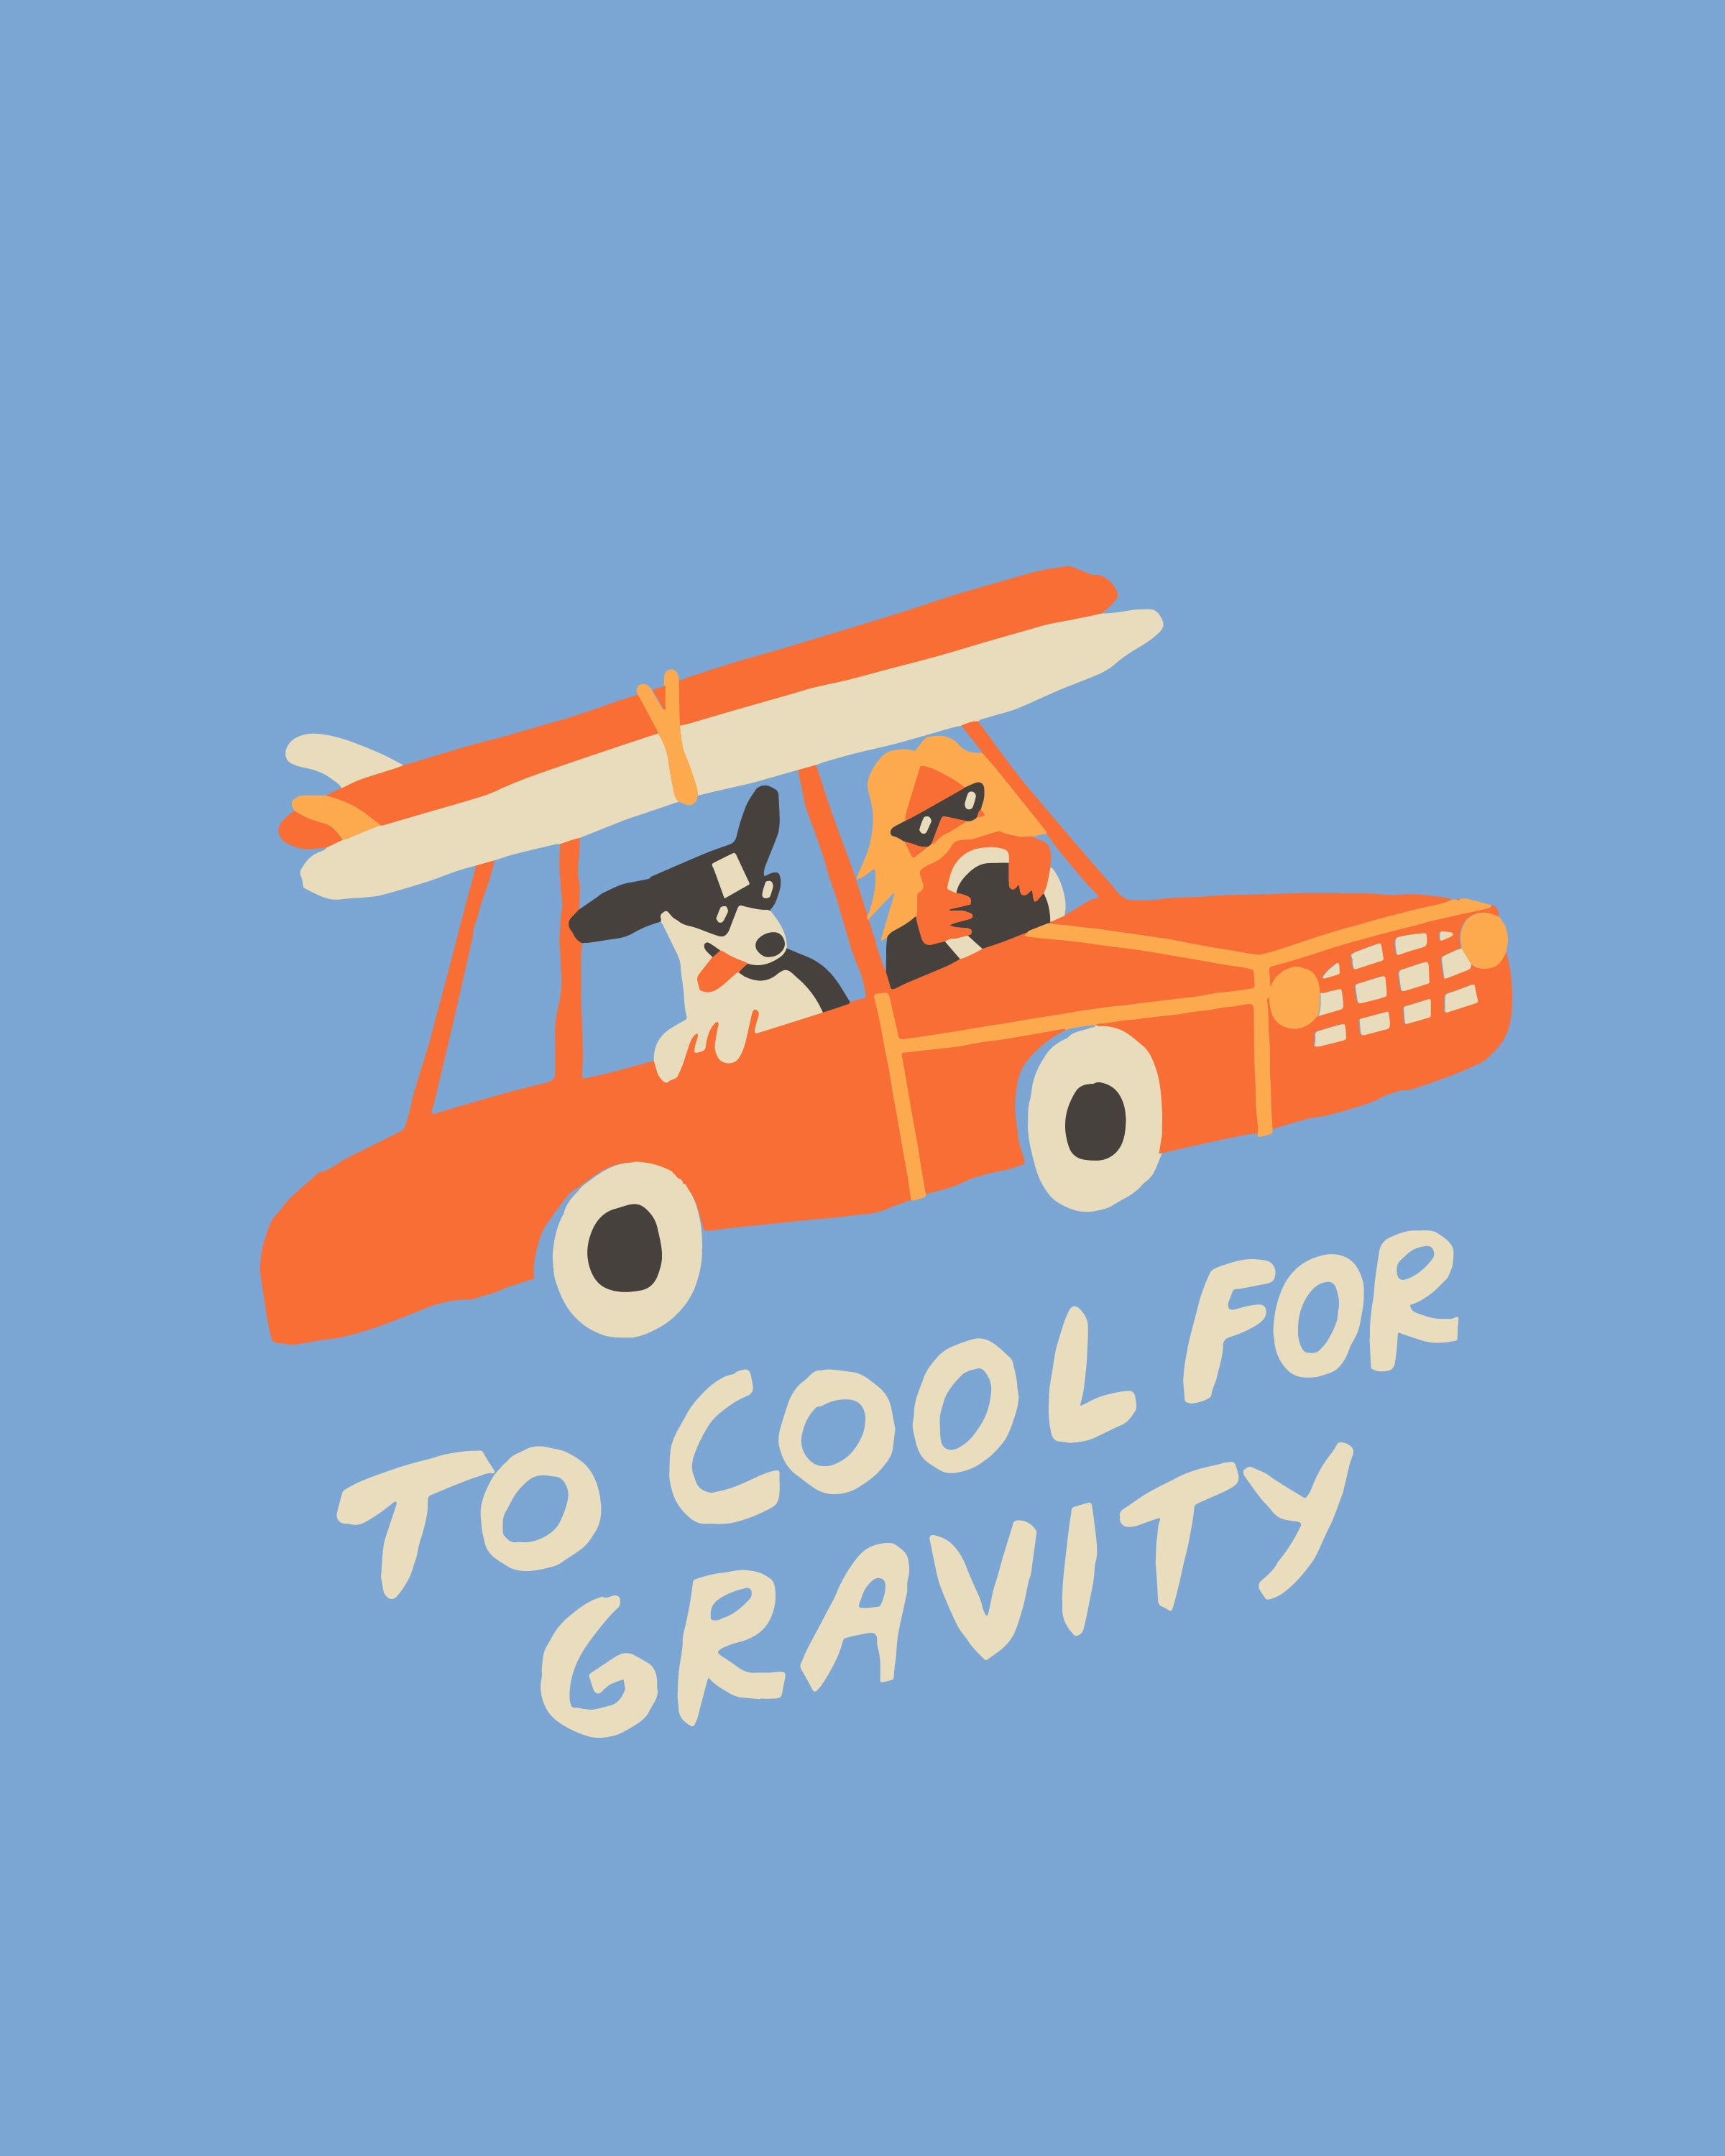 To Cool For Gravity